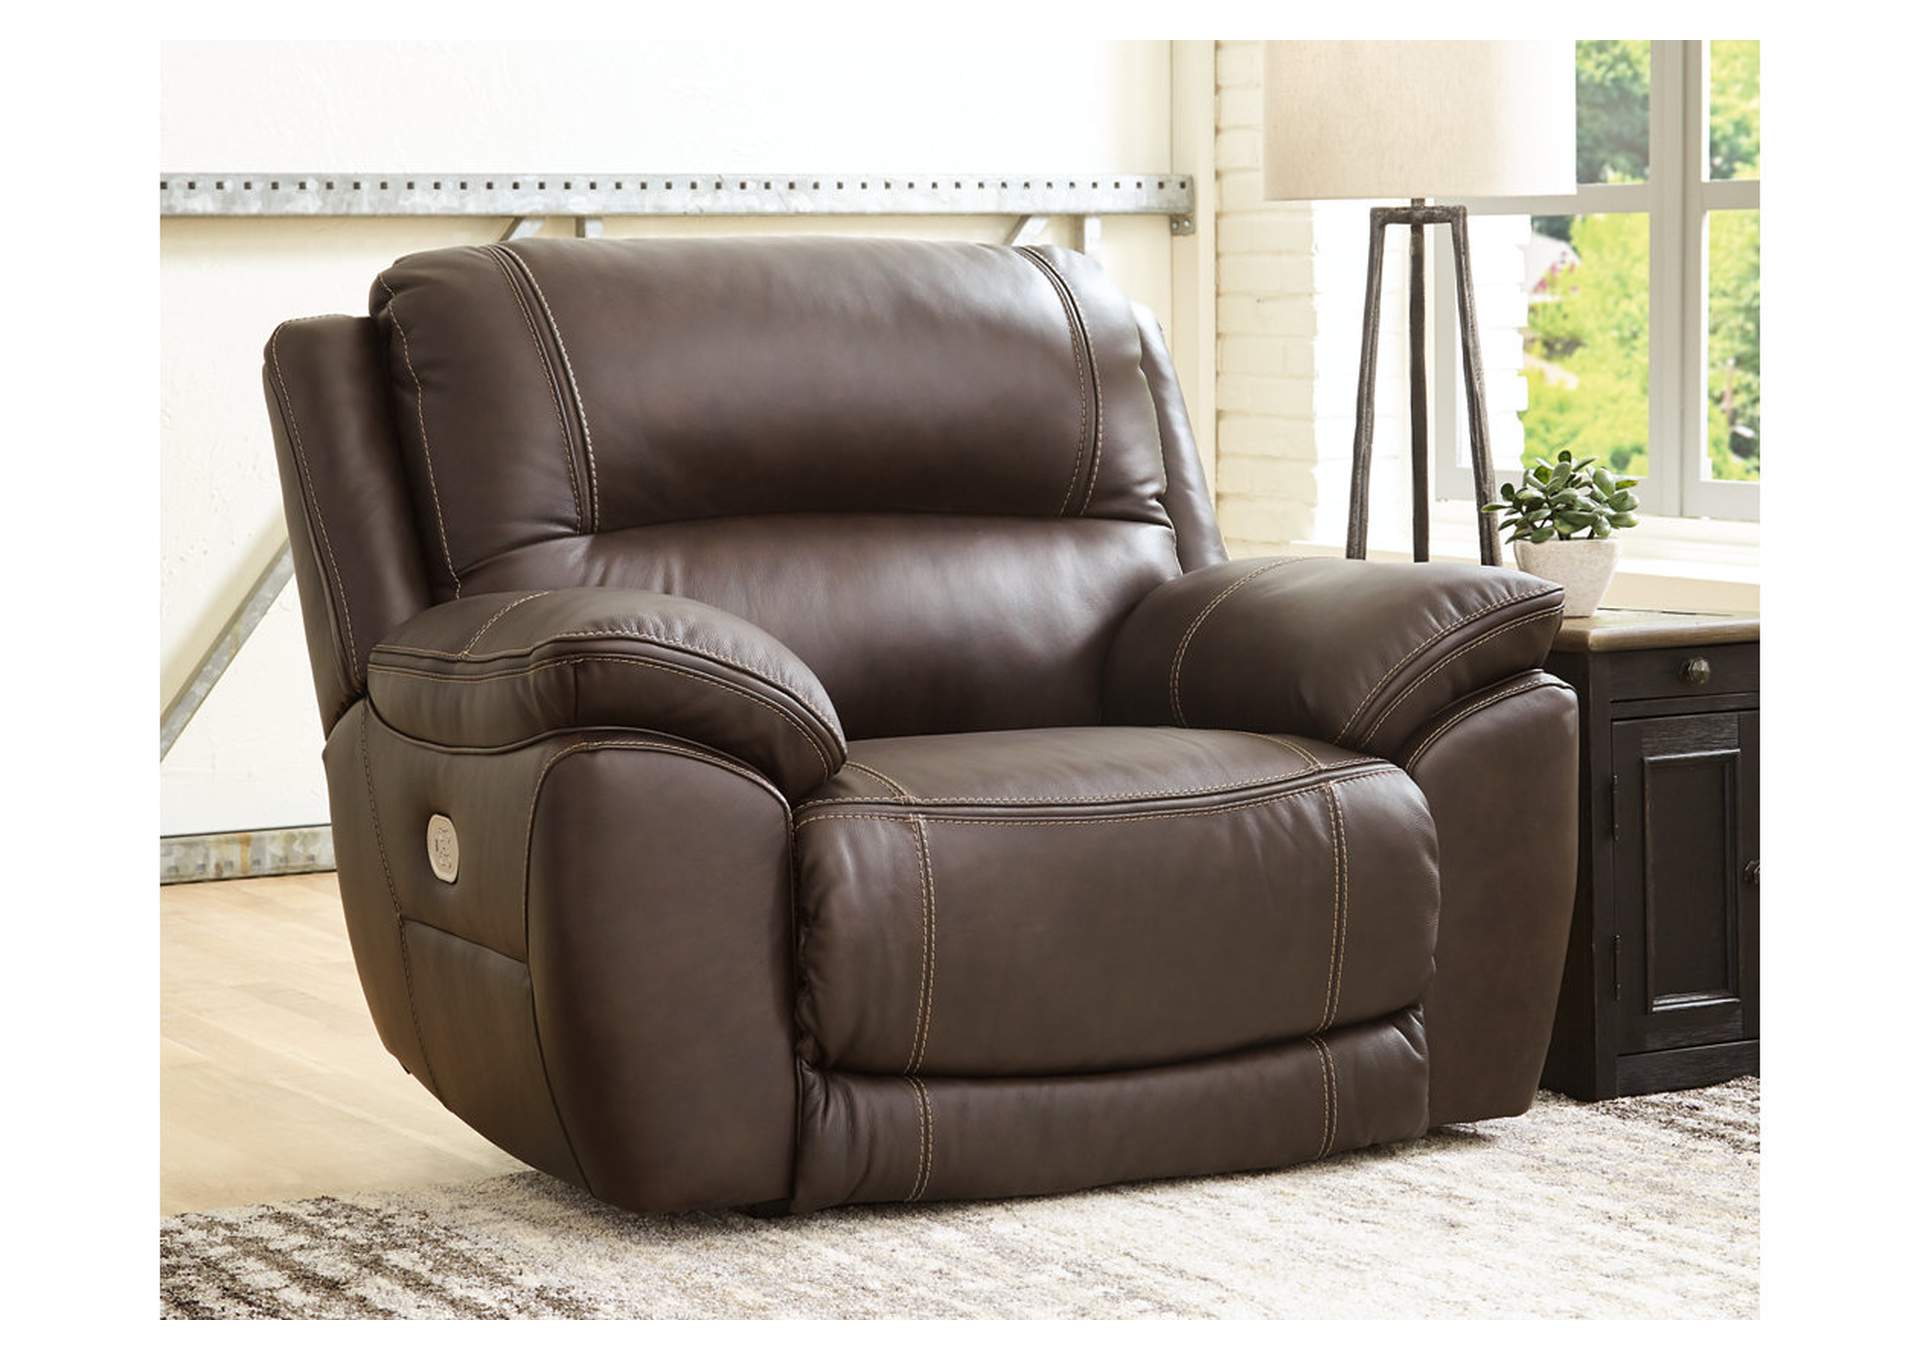 Dunleith Power Recliner,Signature Design By Ashley